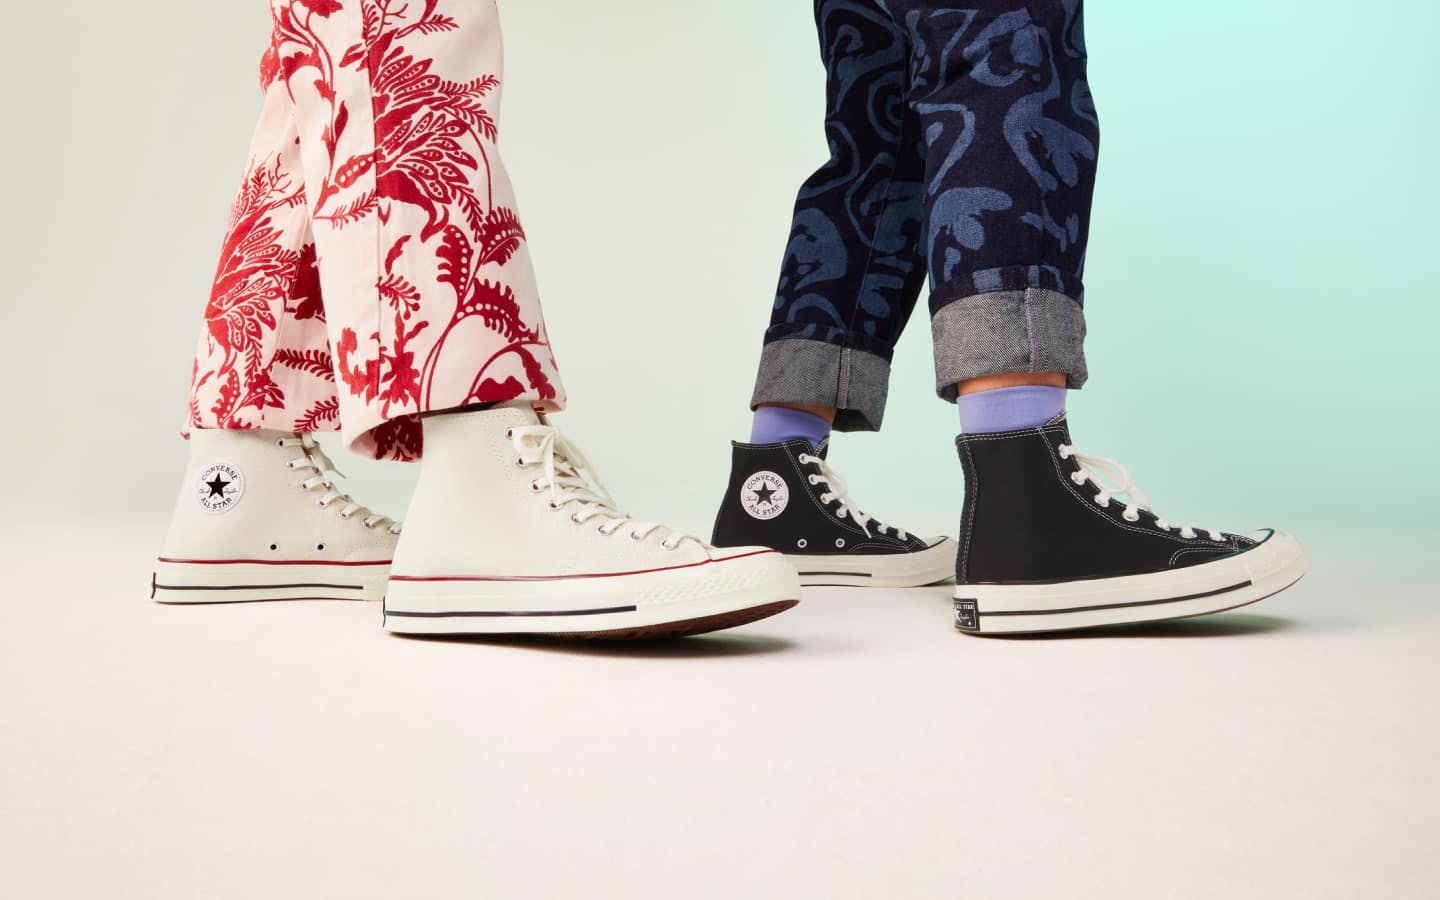 Converse Student Discount: What to Know - The Krazy Coupon Lady